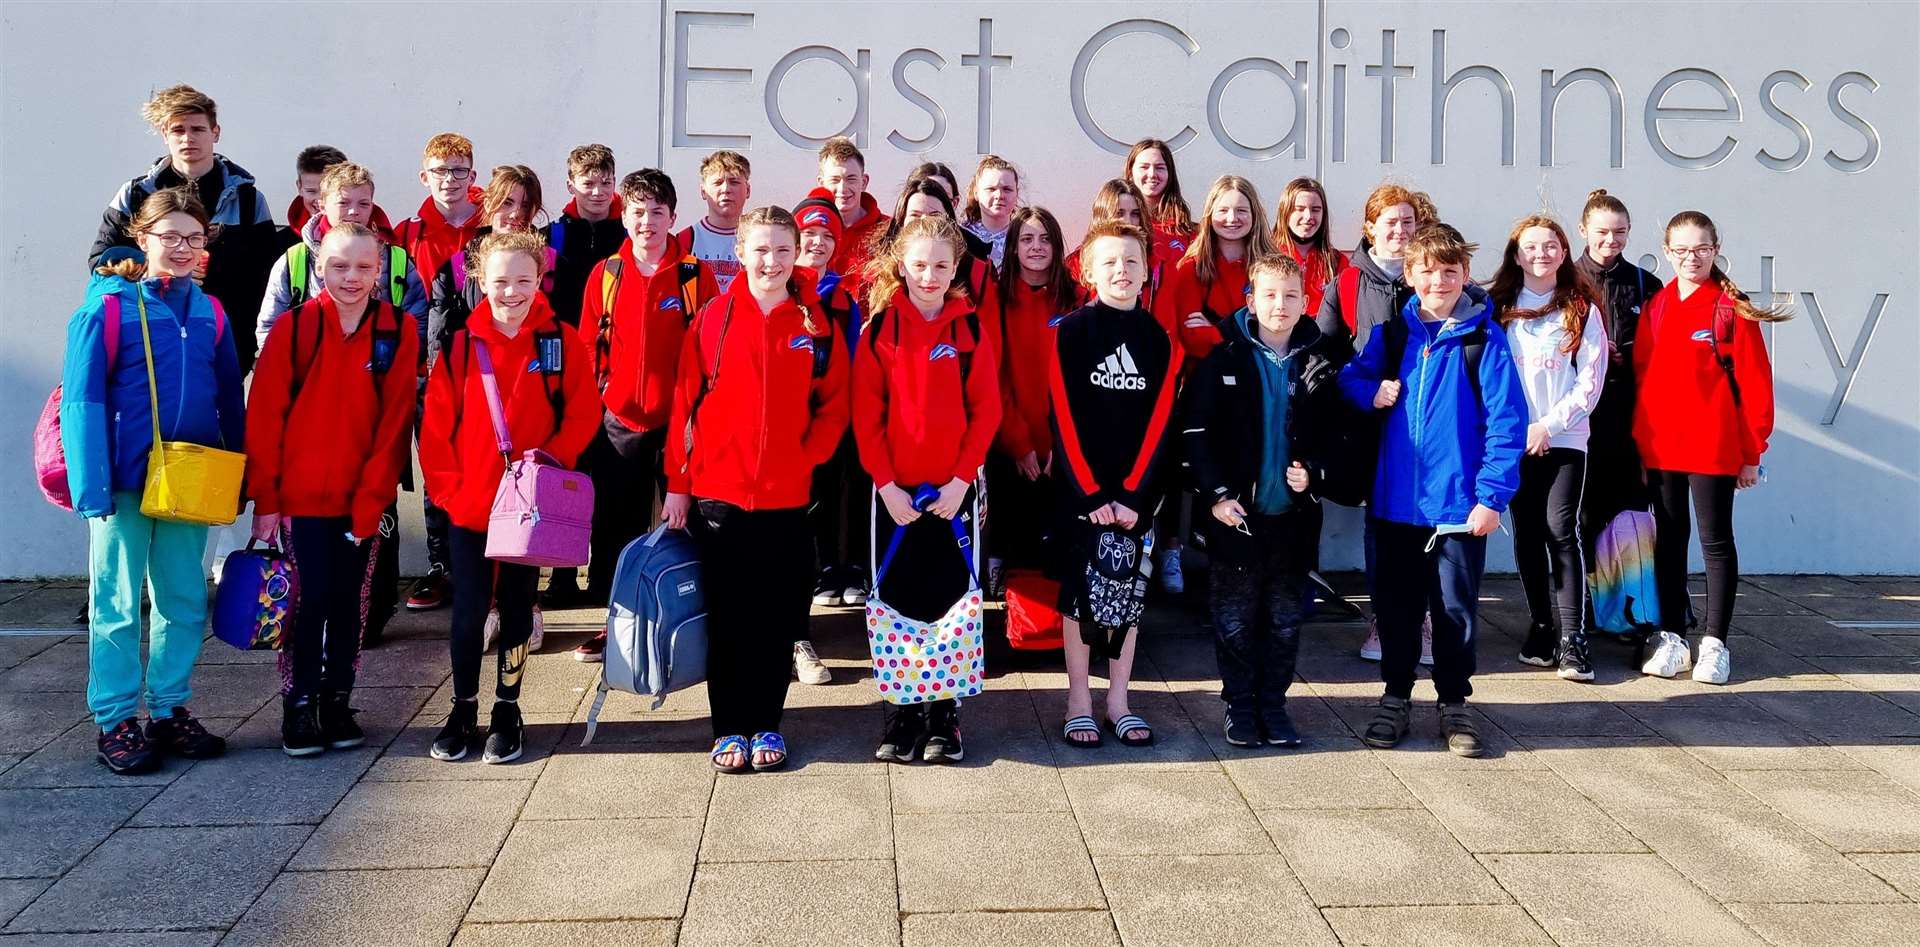 Thurso swimmers who competed in the first Pentland Pentaqua competition at the East Caithness Community Facility.